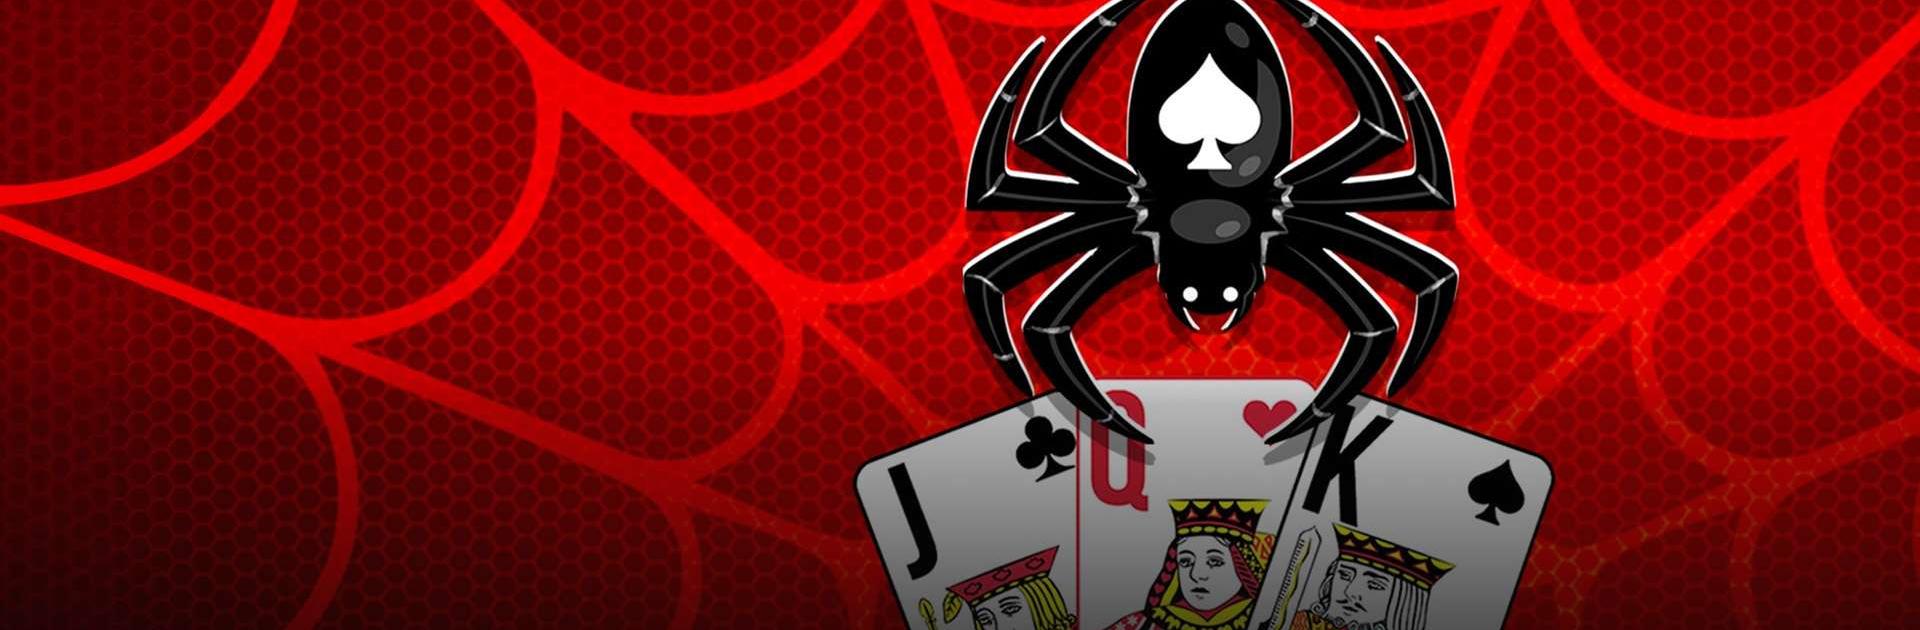 Play Spider Solitaire Online